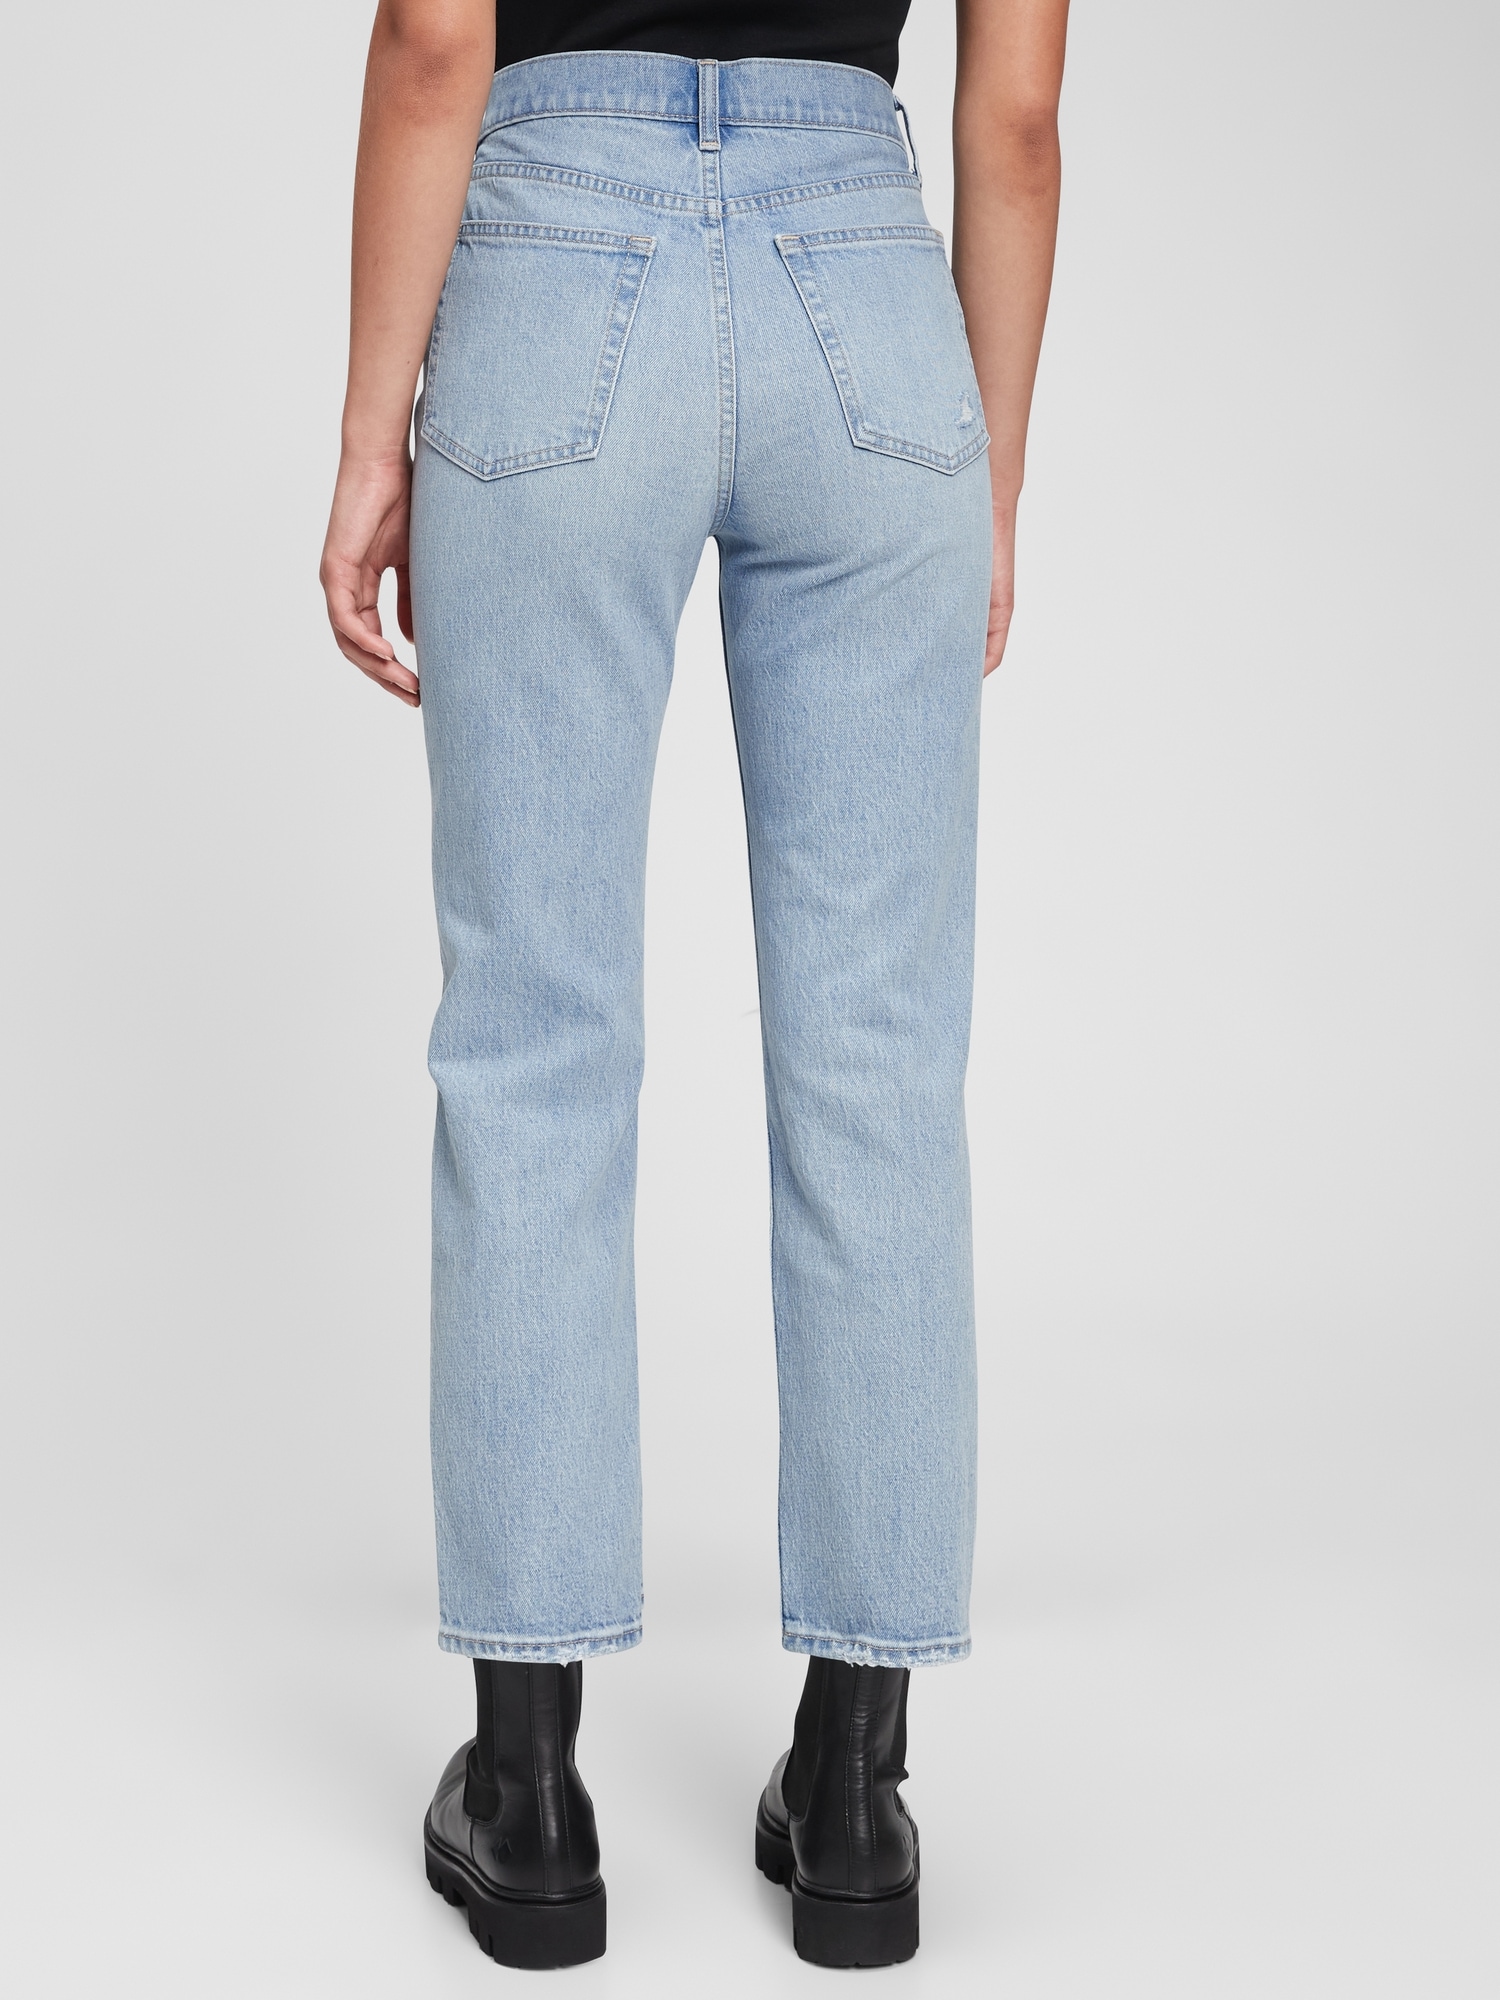 High Rise Destructed Cheeky Straight Jeans with Washwell | Gap